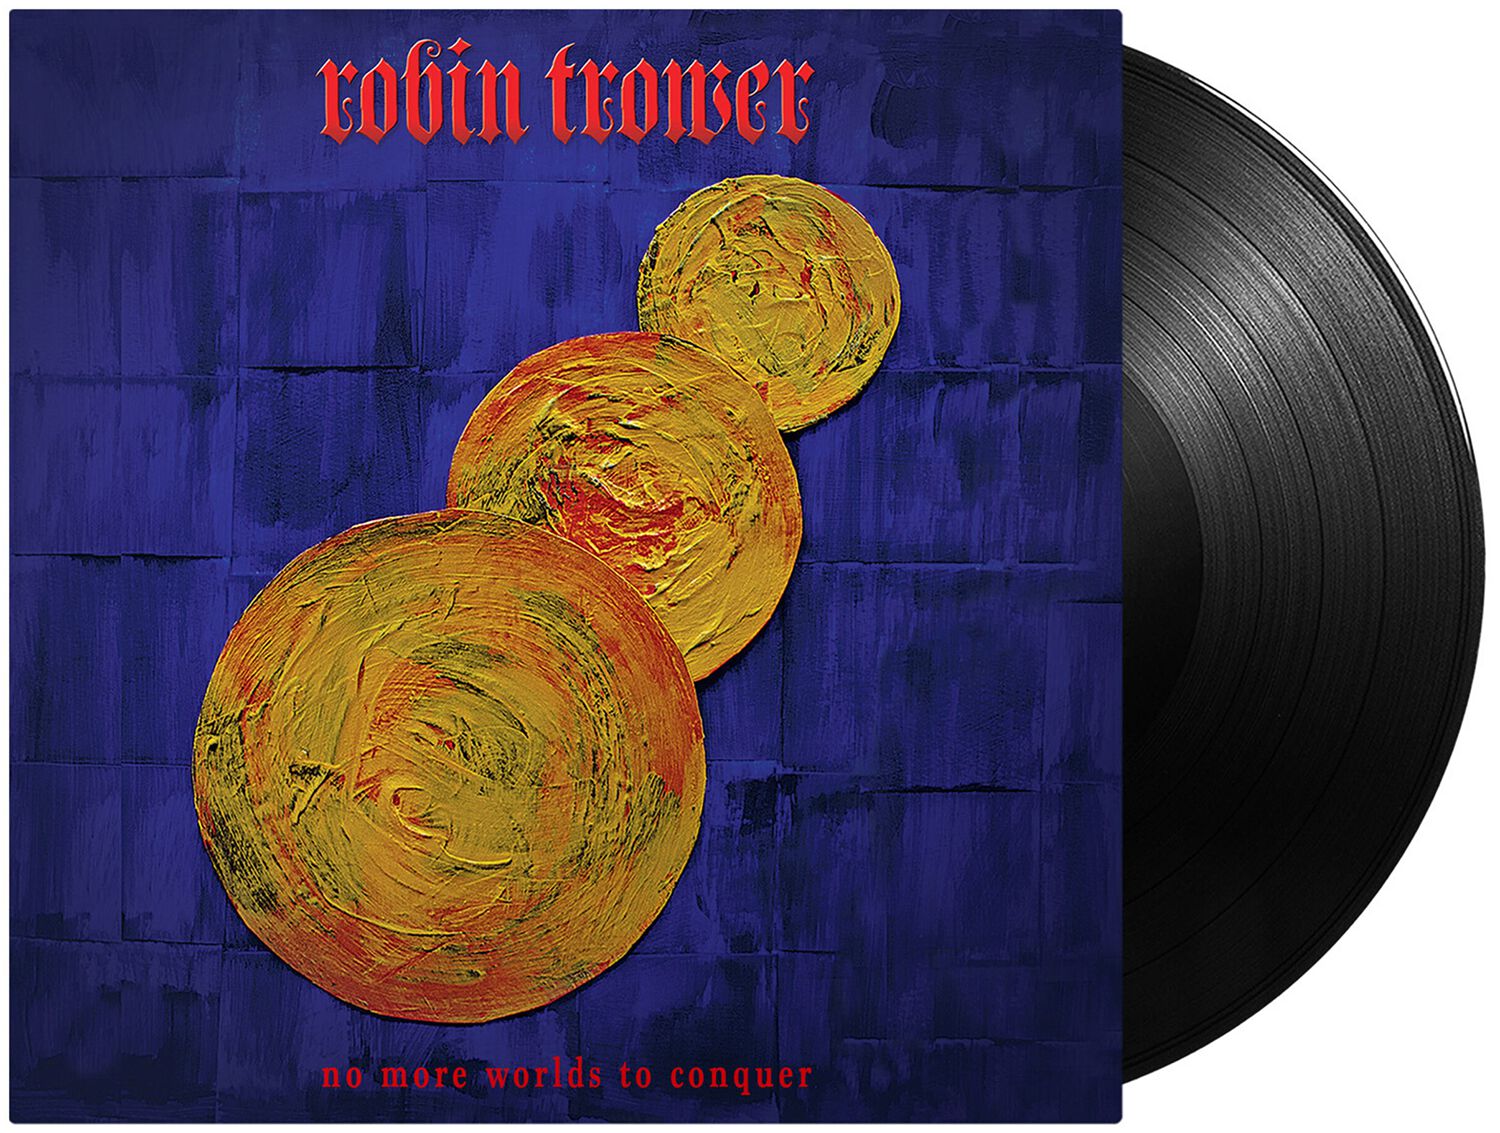 Robin Trower No more worlds to conquer LP black